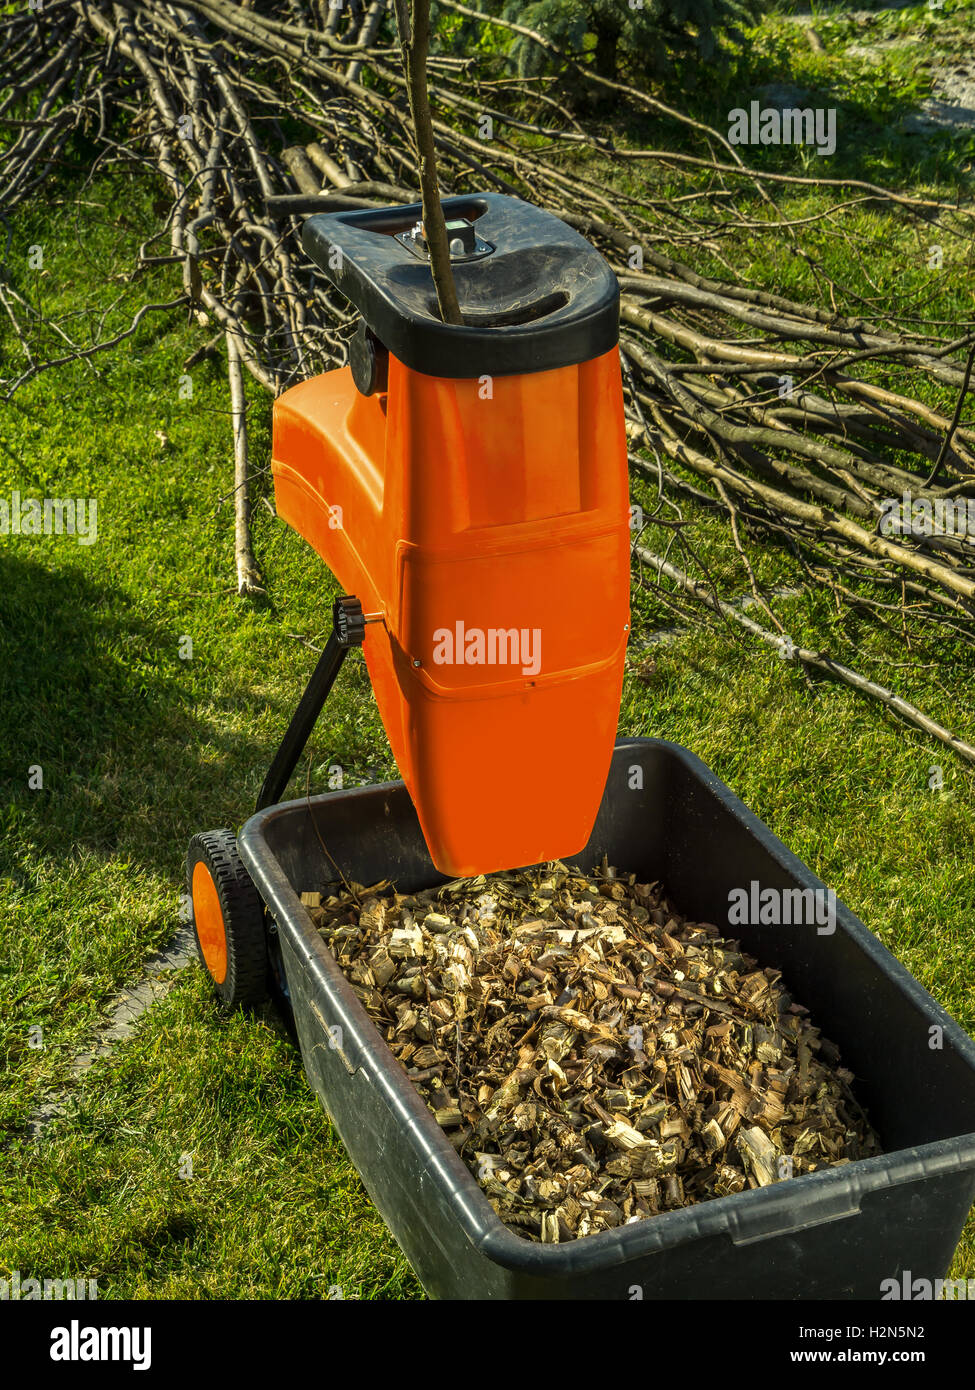 Green Waste Shredder High Resolution Stock Photography and Images - Alamy